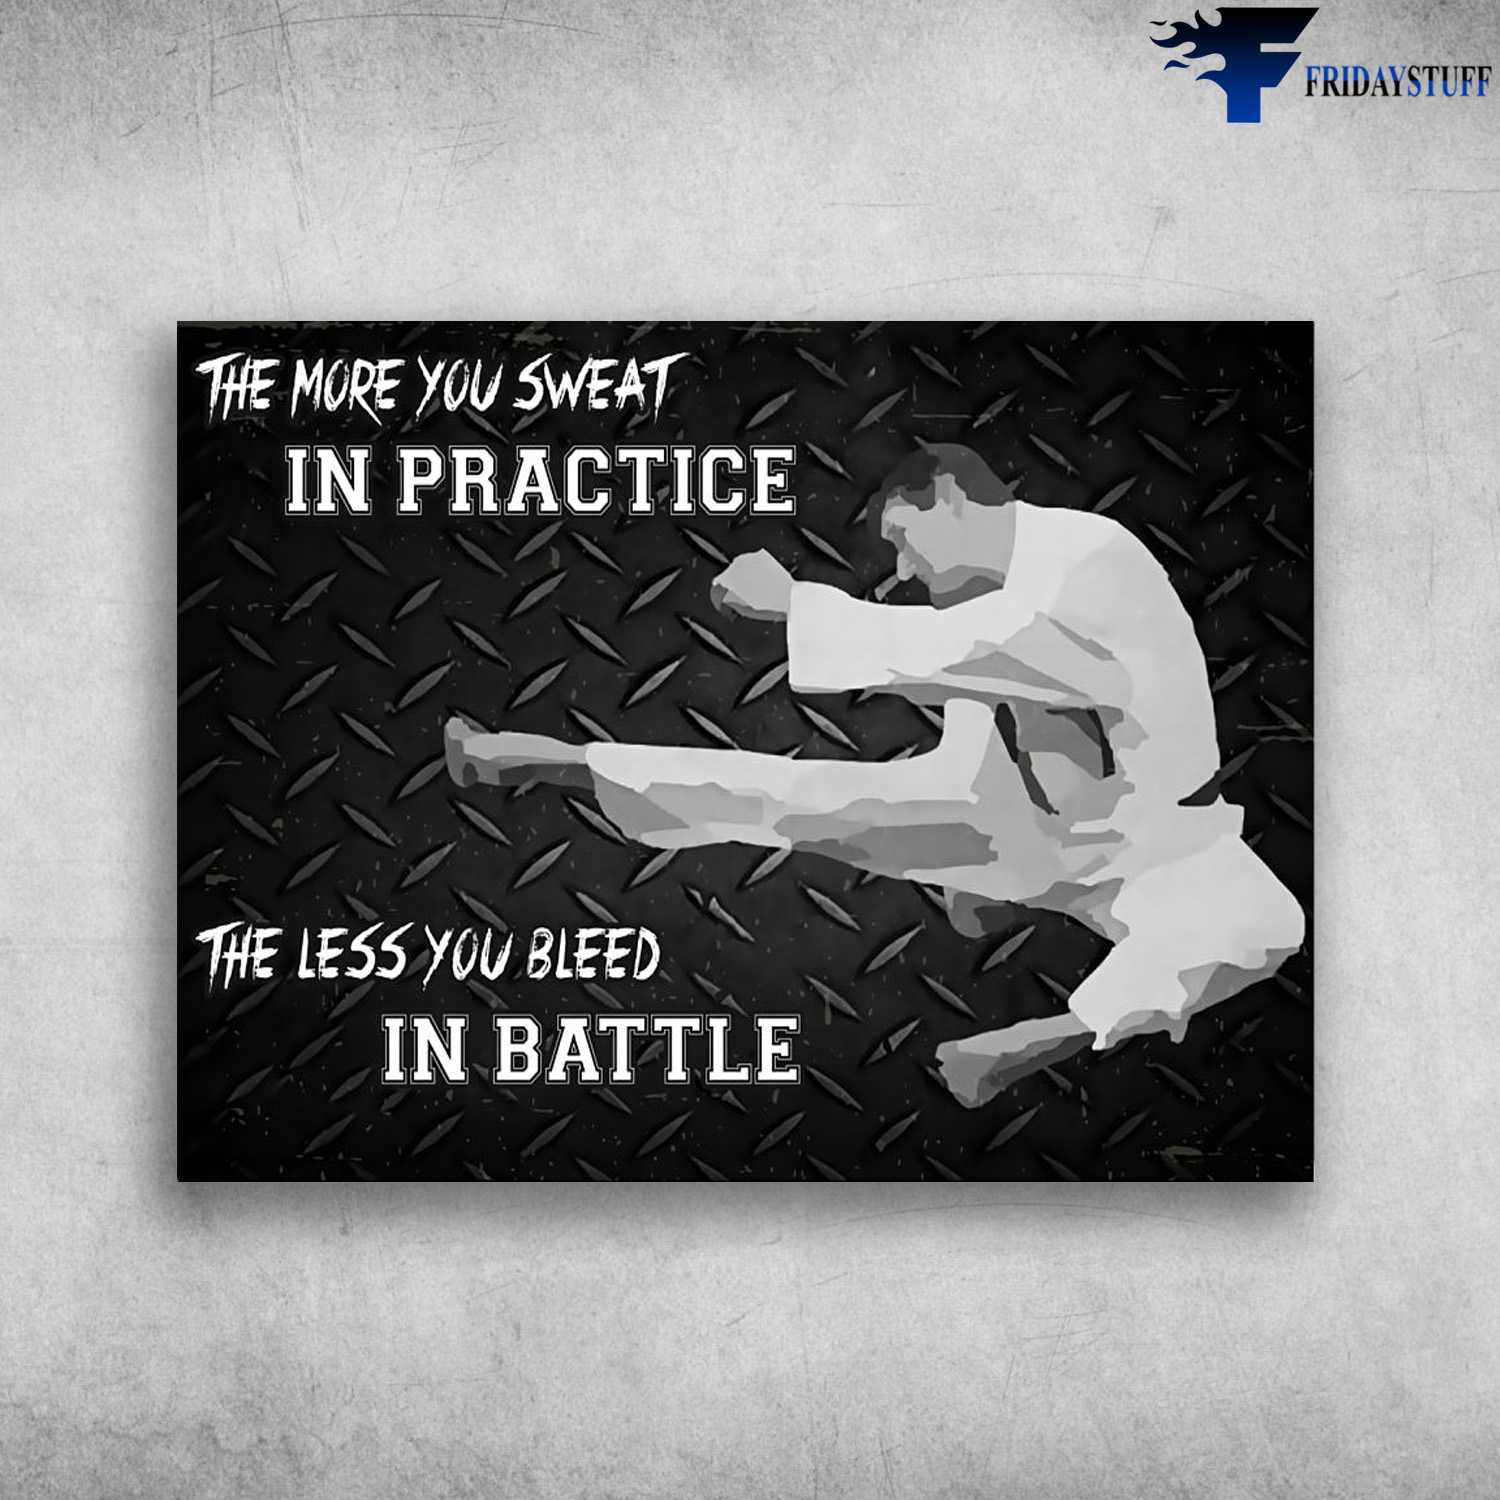 Teakwondo Poster, The More You Sweat In Practice, The Less You Bleed In The Battle